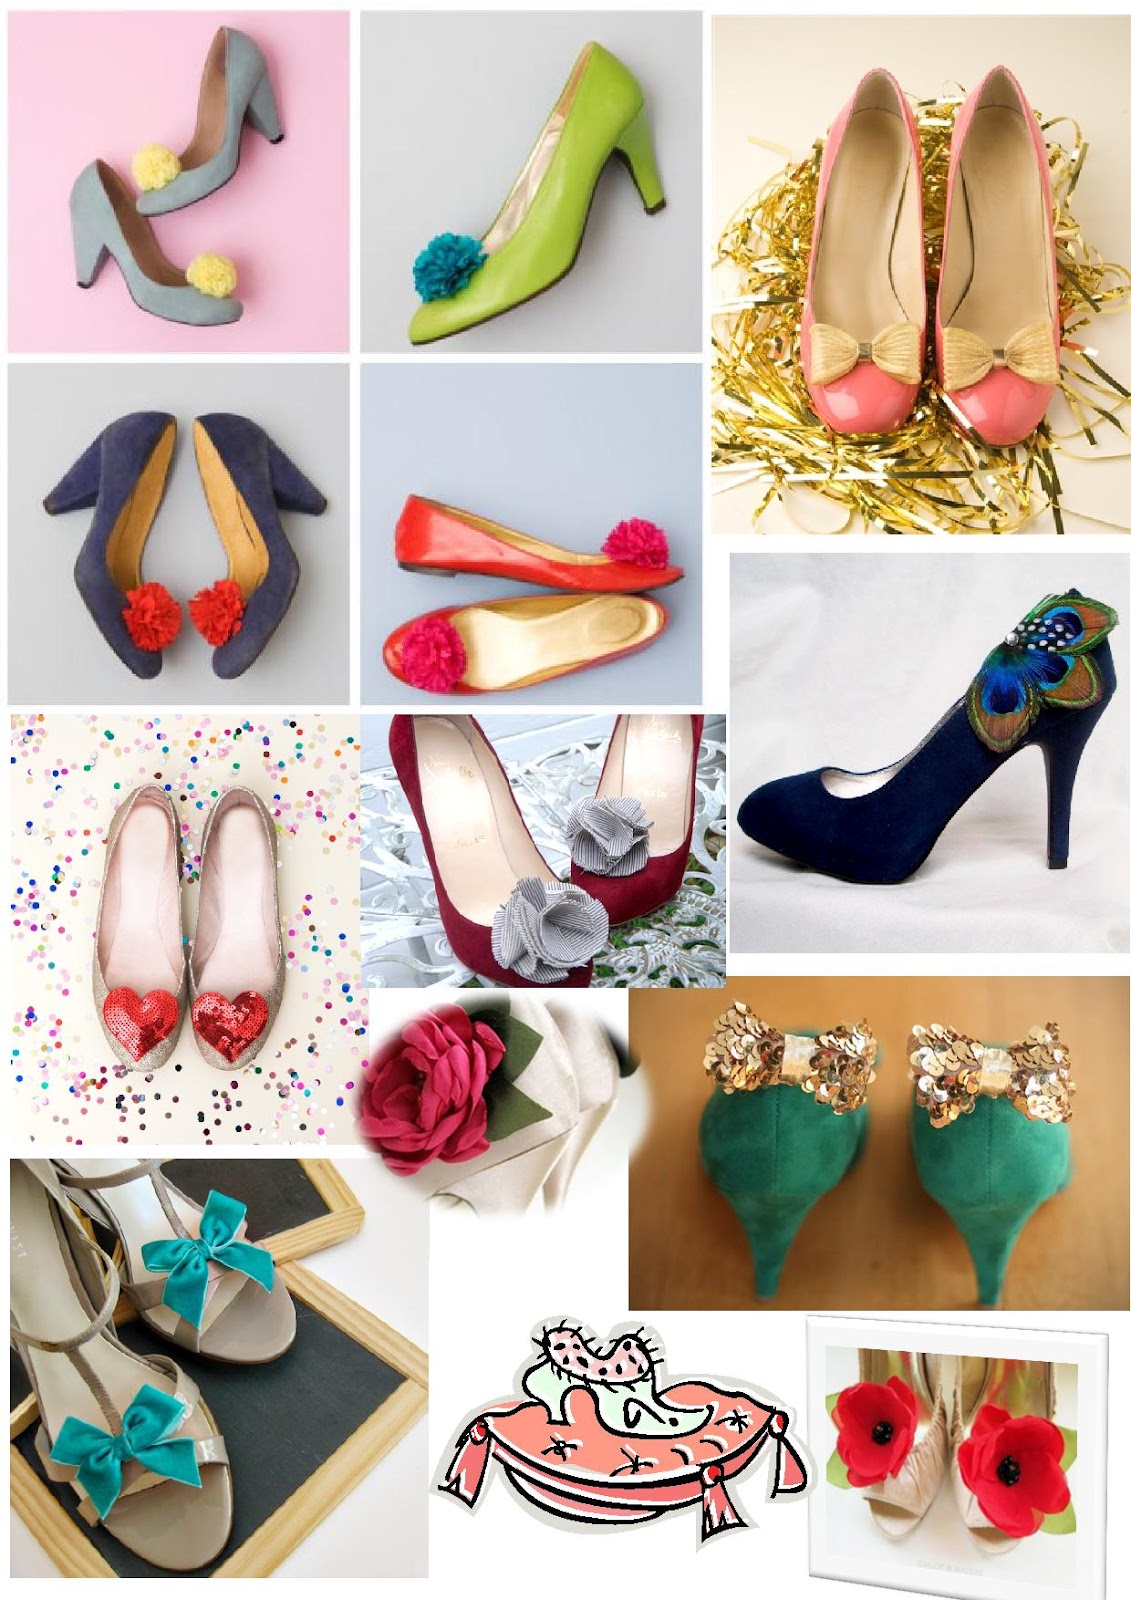 Comment customiser ses chaussures ?